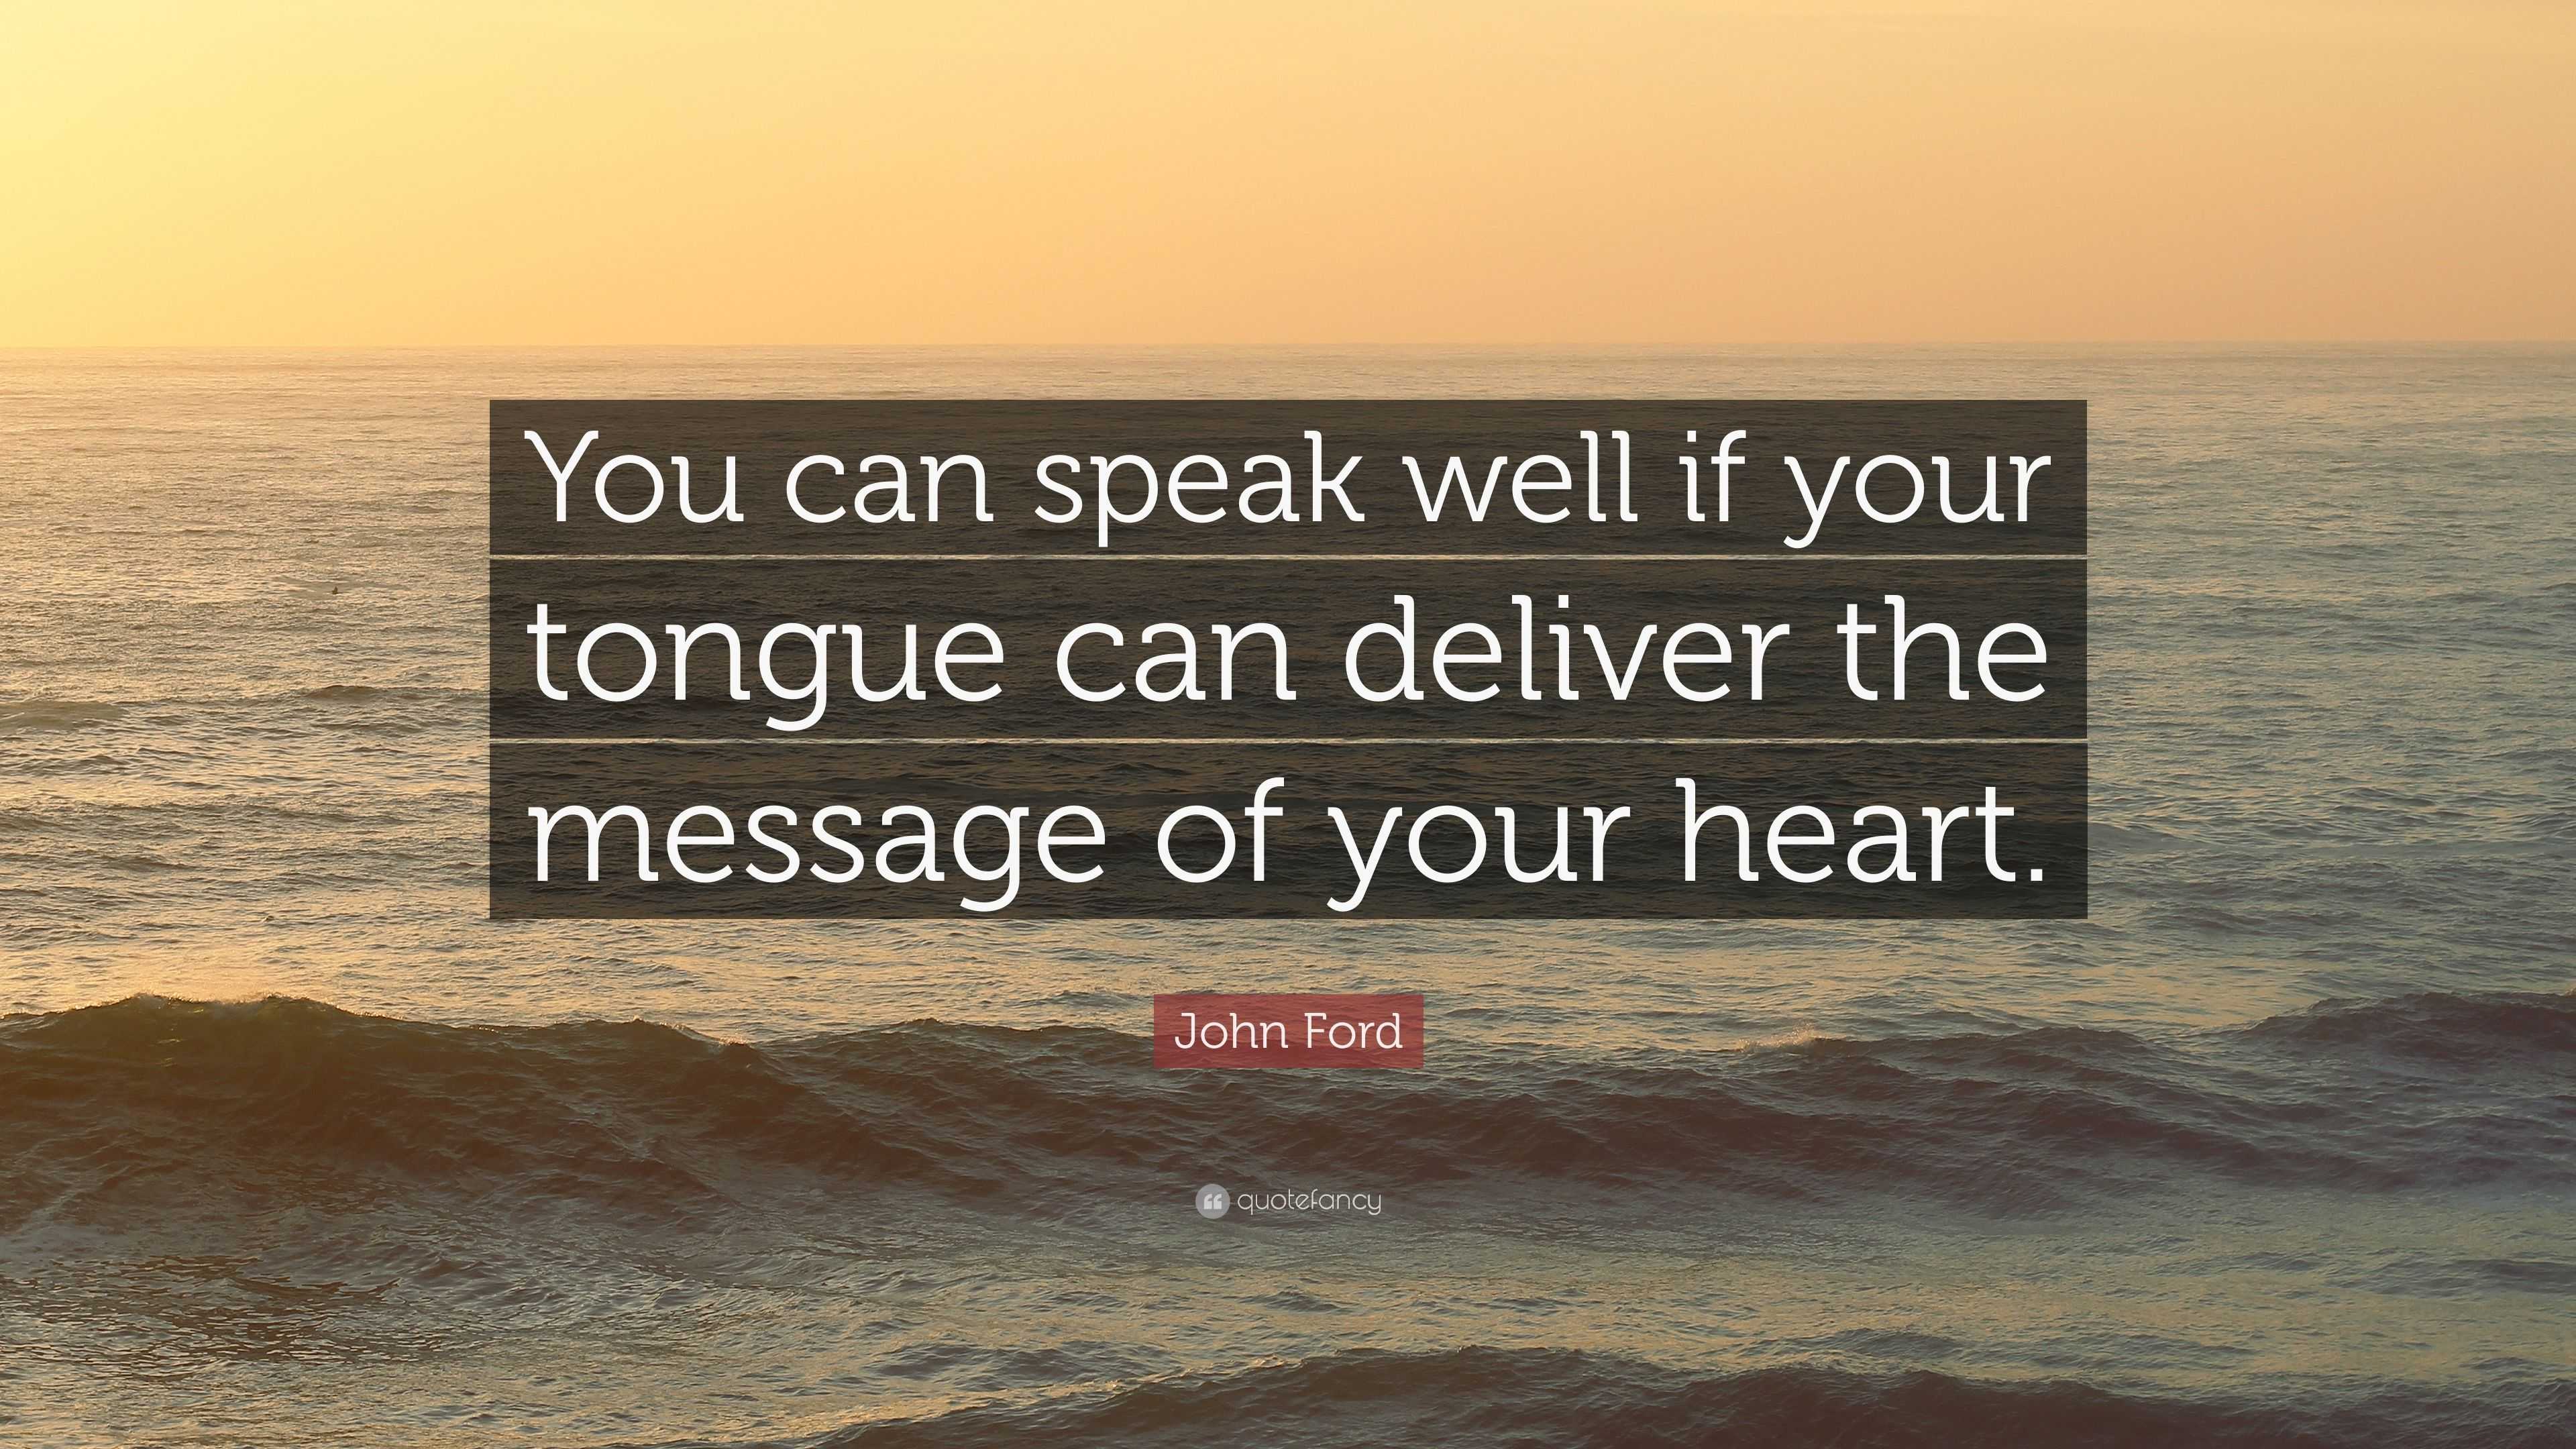 John Ford Quote You Can Speak Well If Your Tongue Can Deliver The Message Of Your